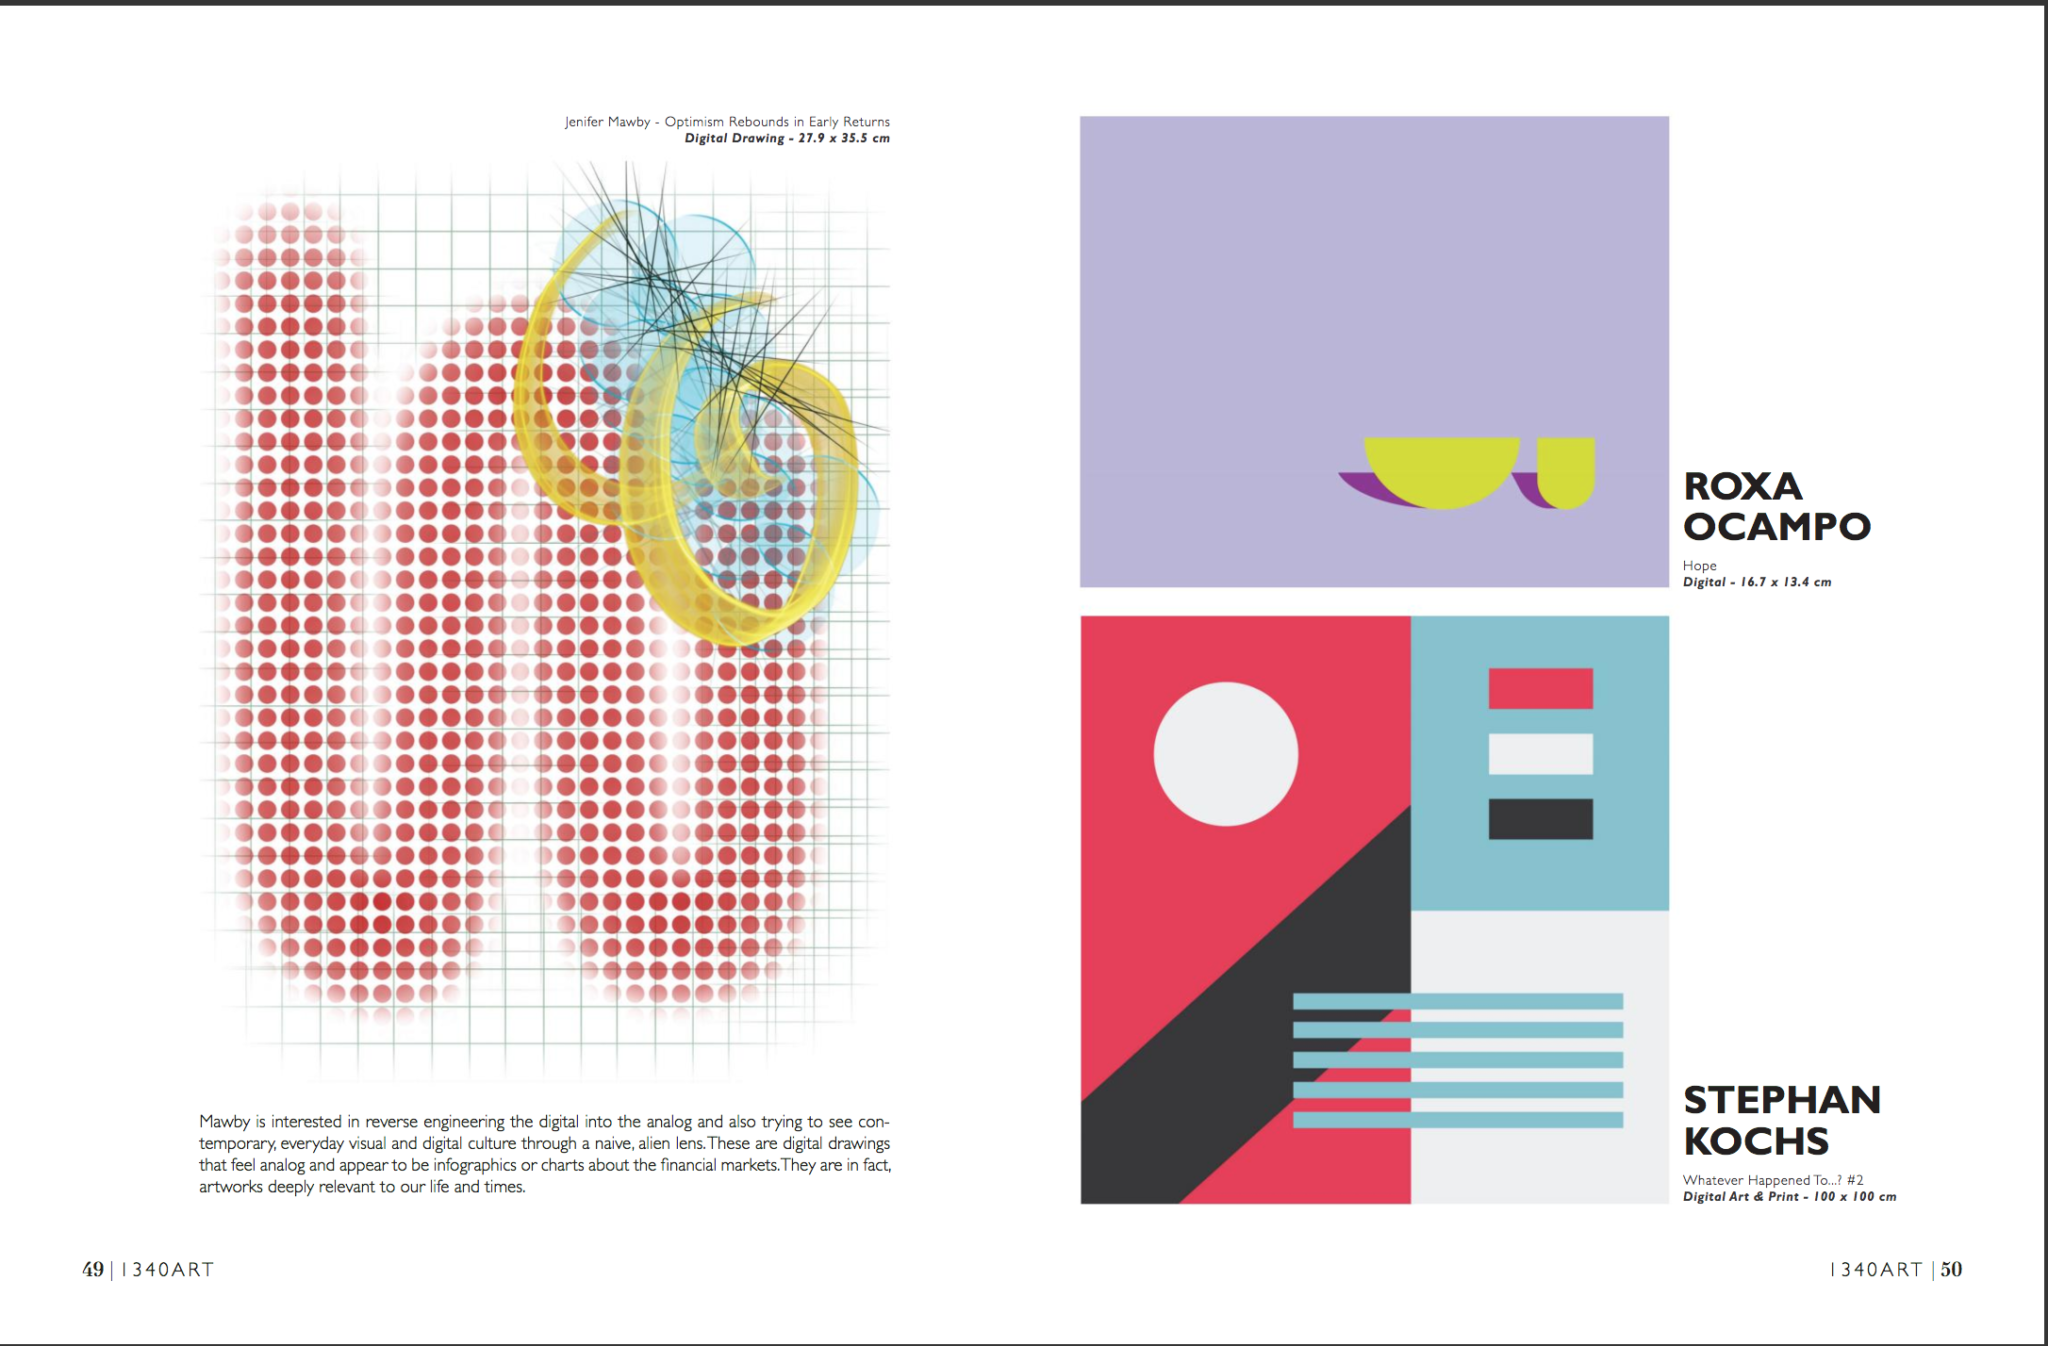 Digital Drawings published in 1340 Art Magazine